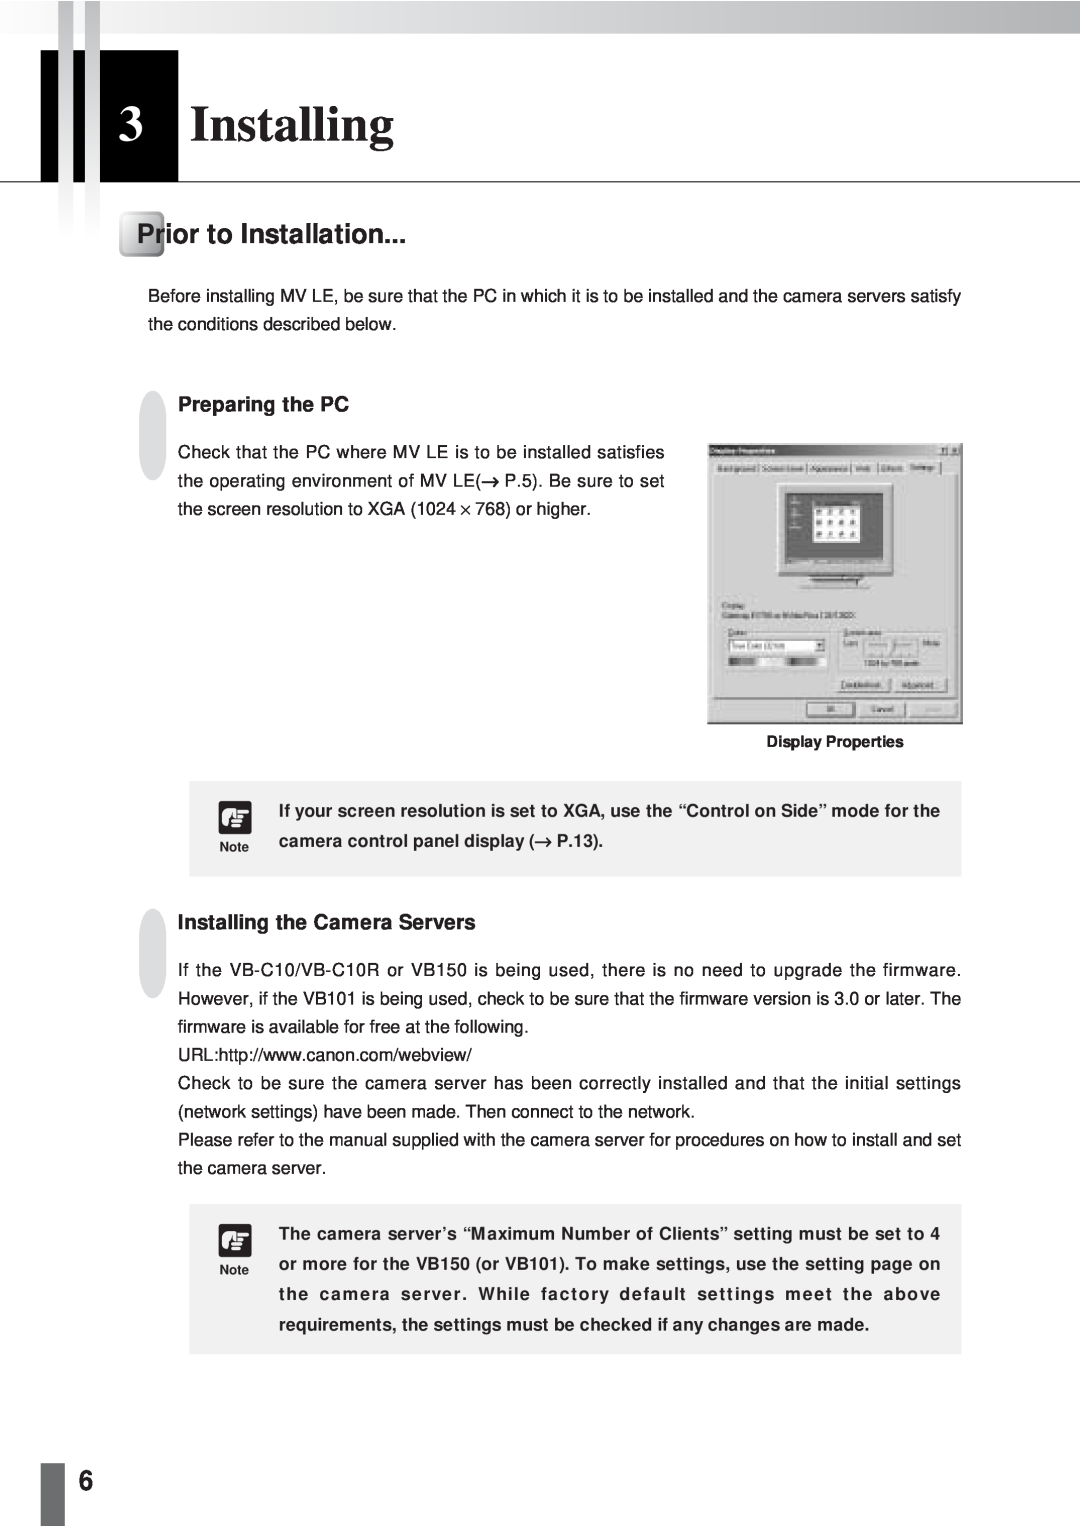 Canon 2.1 user manual 3Installing, Prior to Installation, Preparing the PC, Installing the Camera Servers 